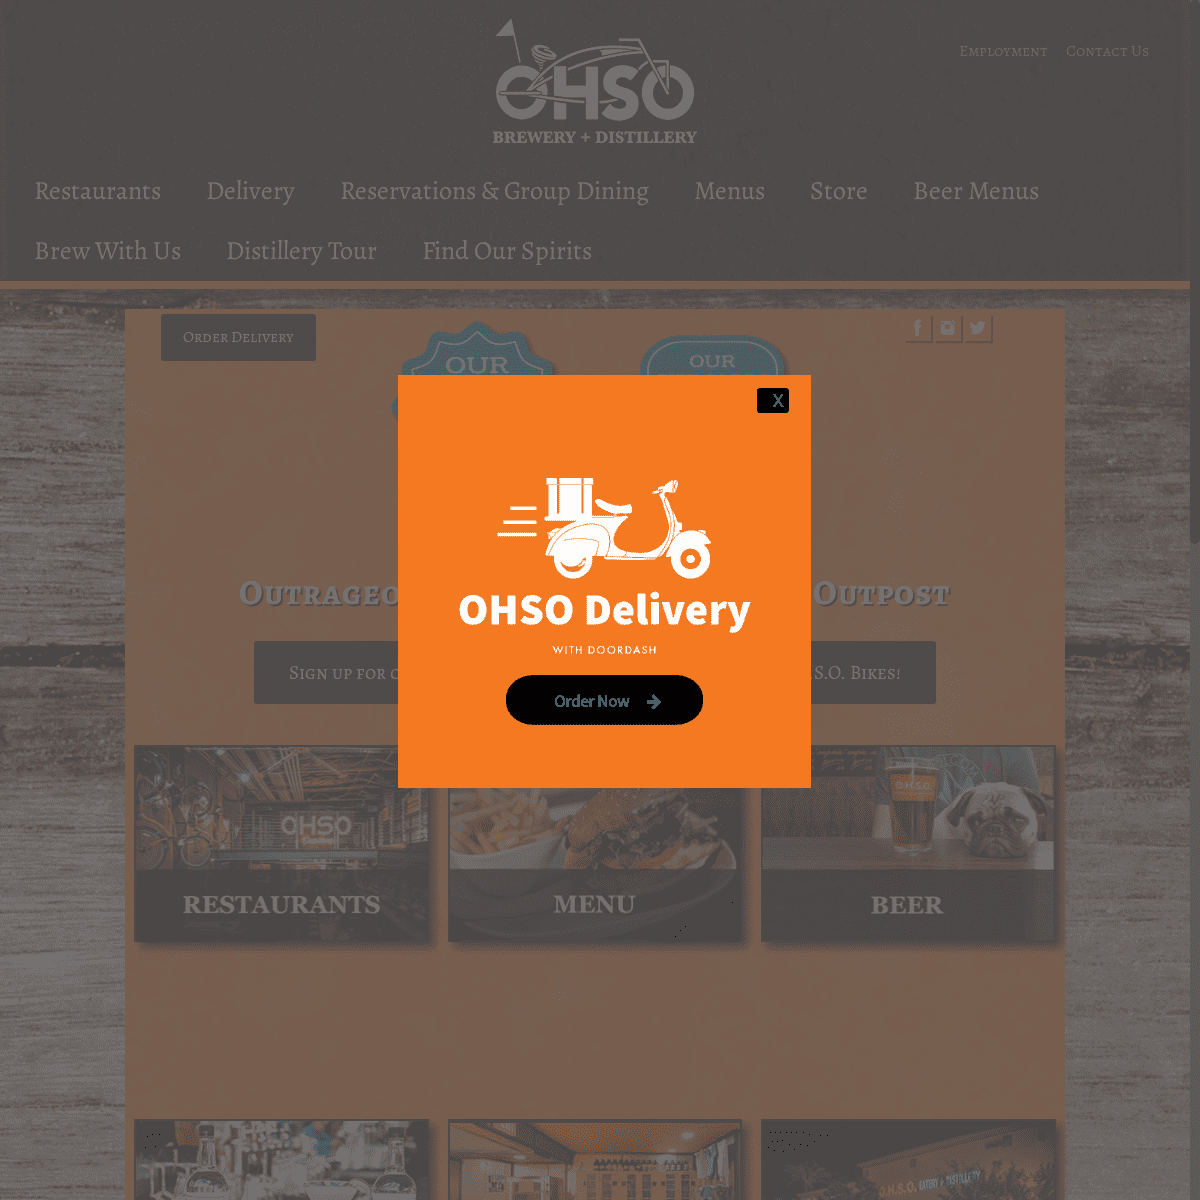 A complete backup of https://ohsobrewery.com